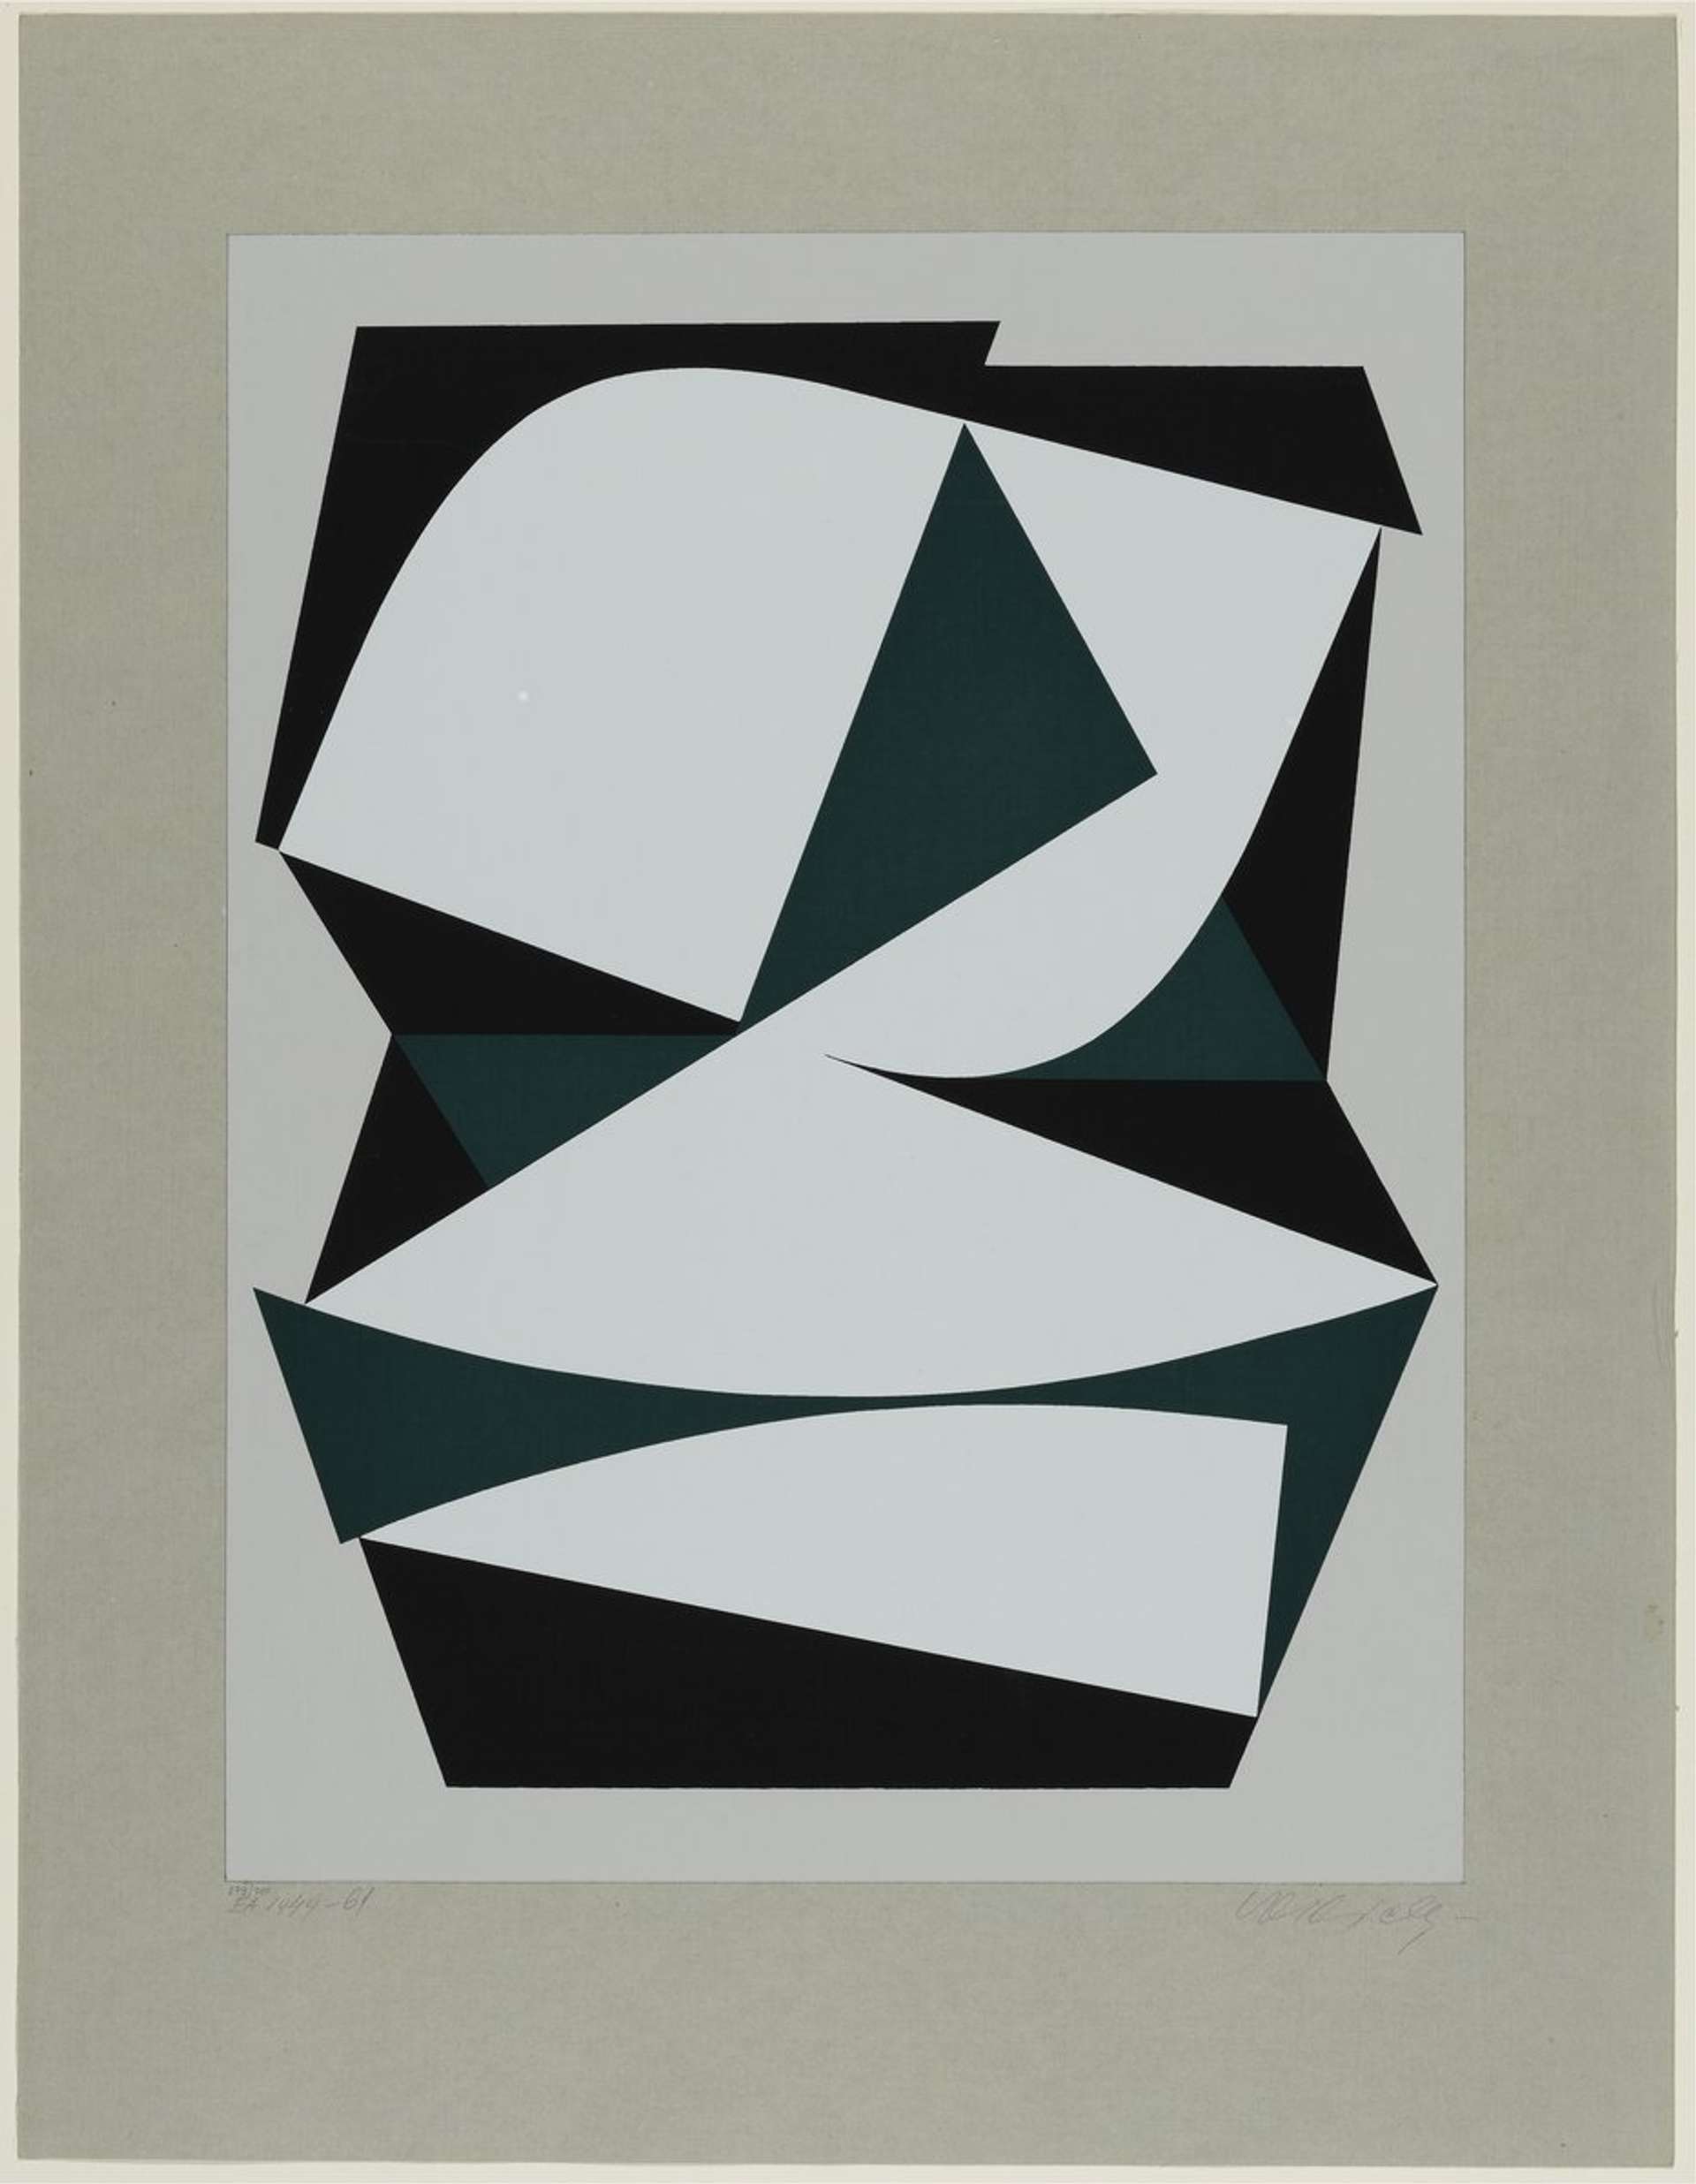 An abstracted composition of various geometric forms and triangular shapes in black and dark green that disrupt a centre white rectangle that is further surrounded by a beige background.